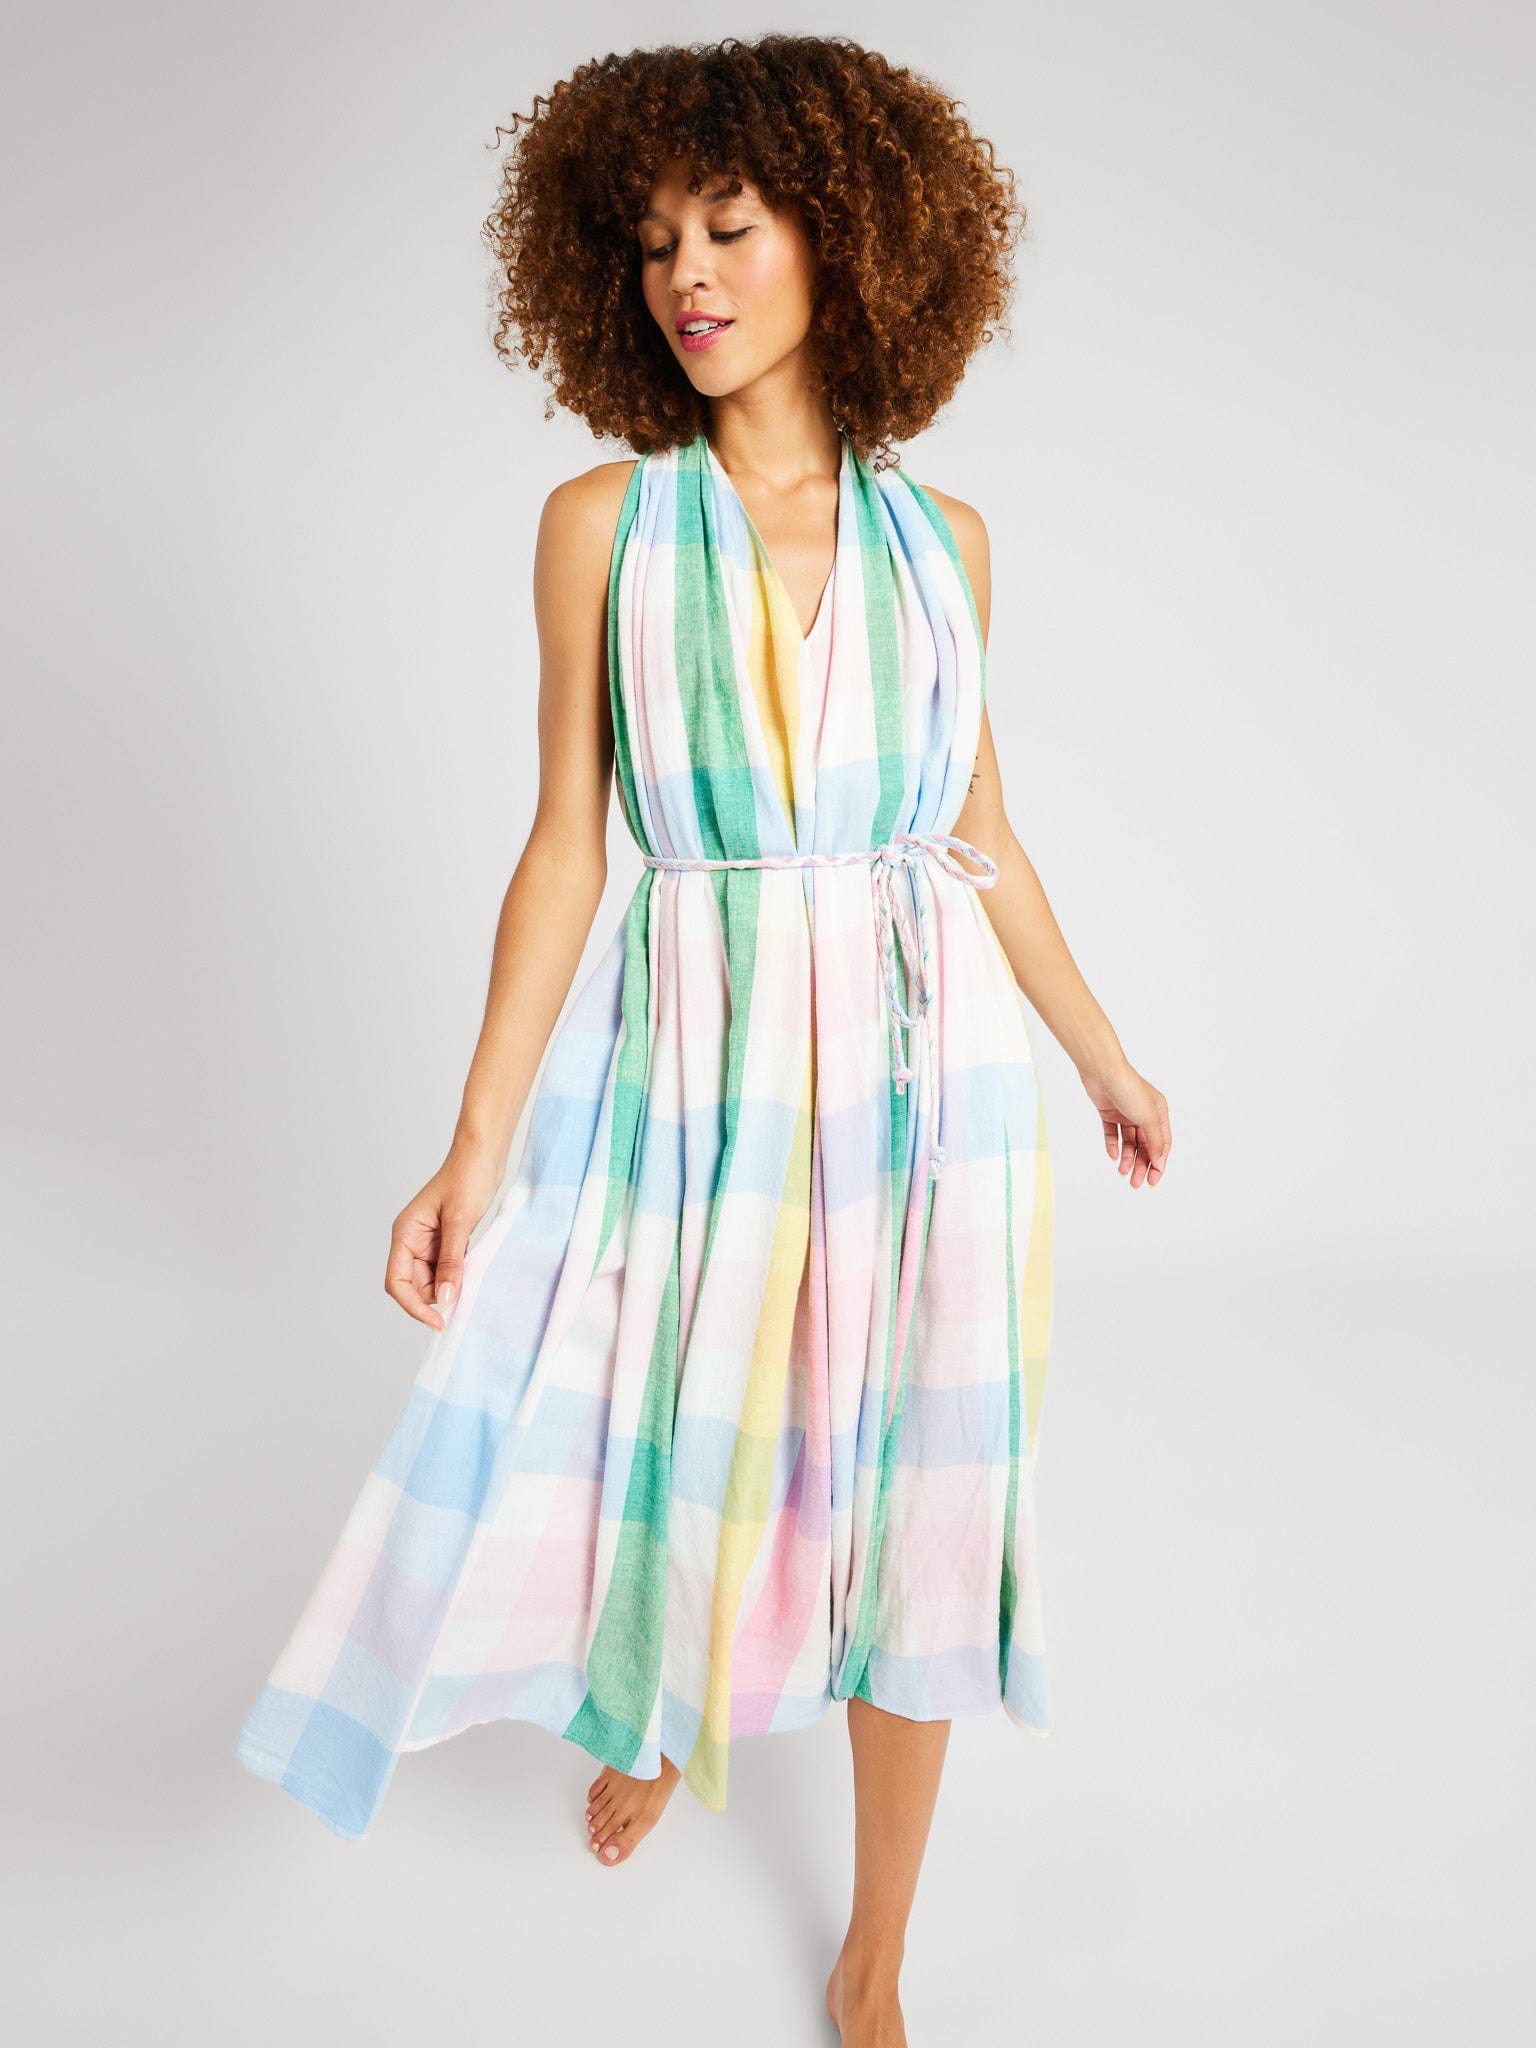 MILLE Clothing Marilyn Dress in Pastel Plaid